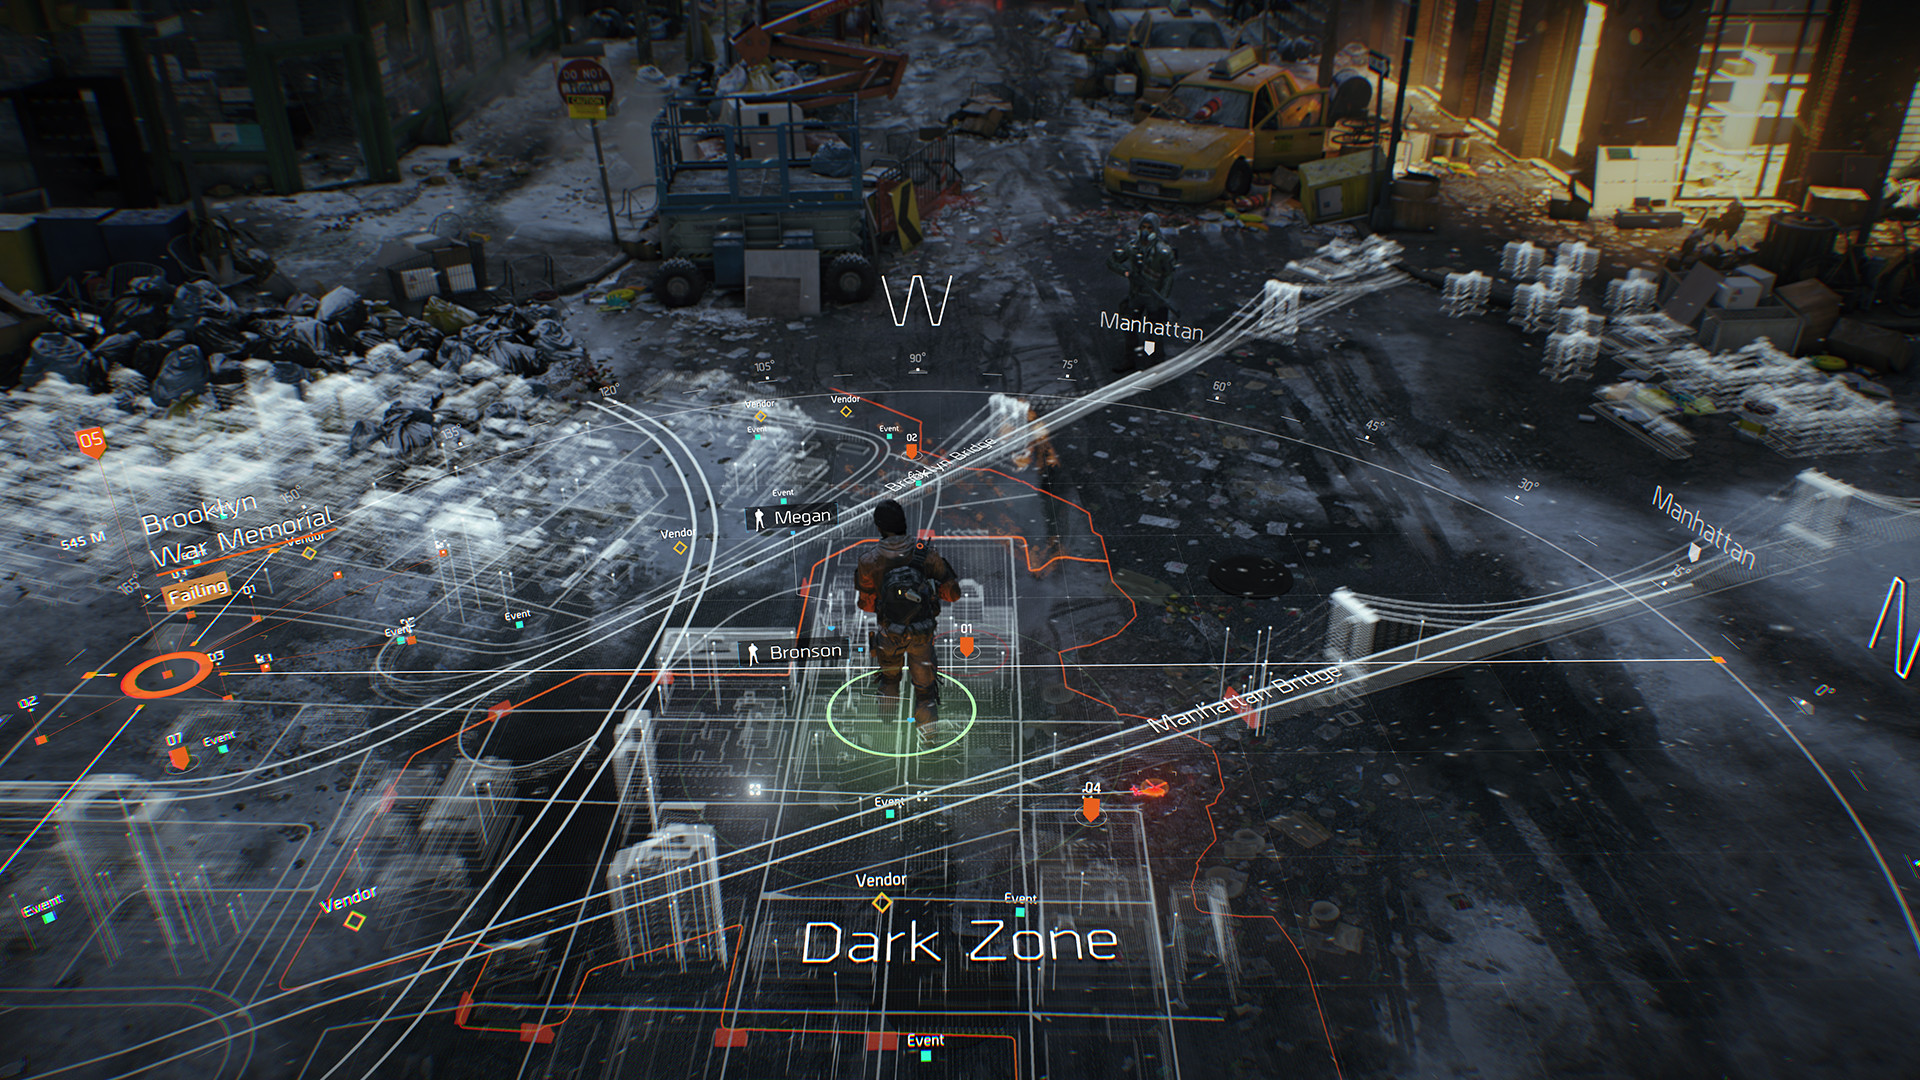 1920x1080 The Division World Map of New York and your location in that world. You can